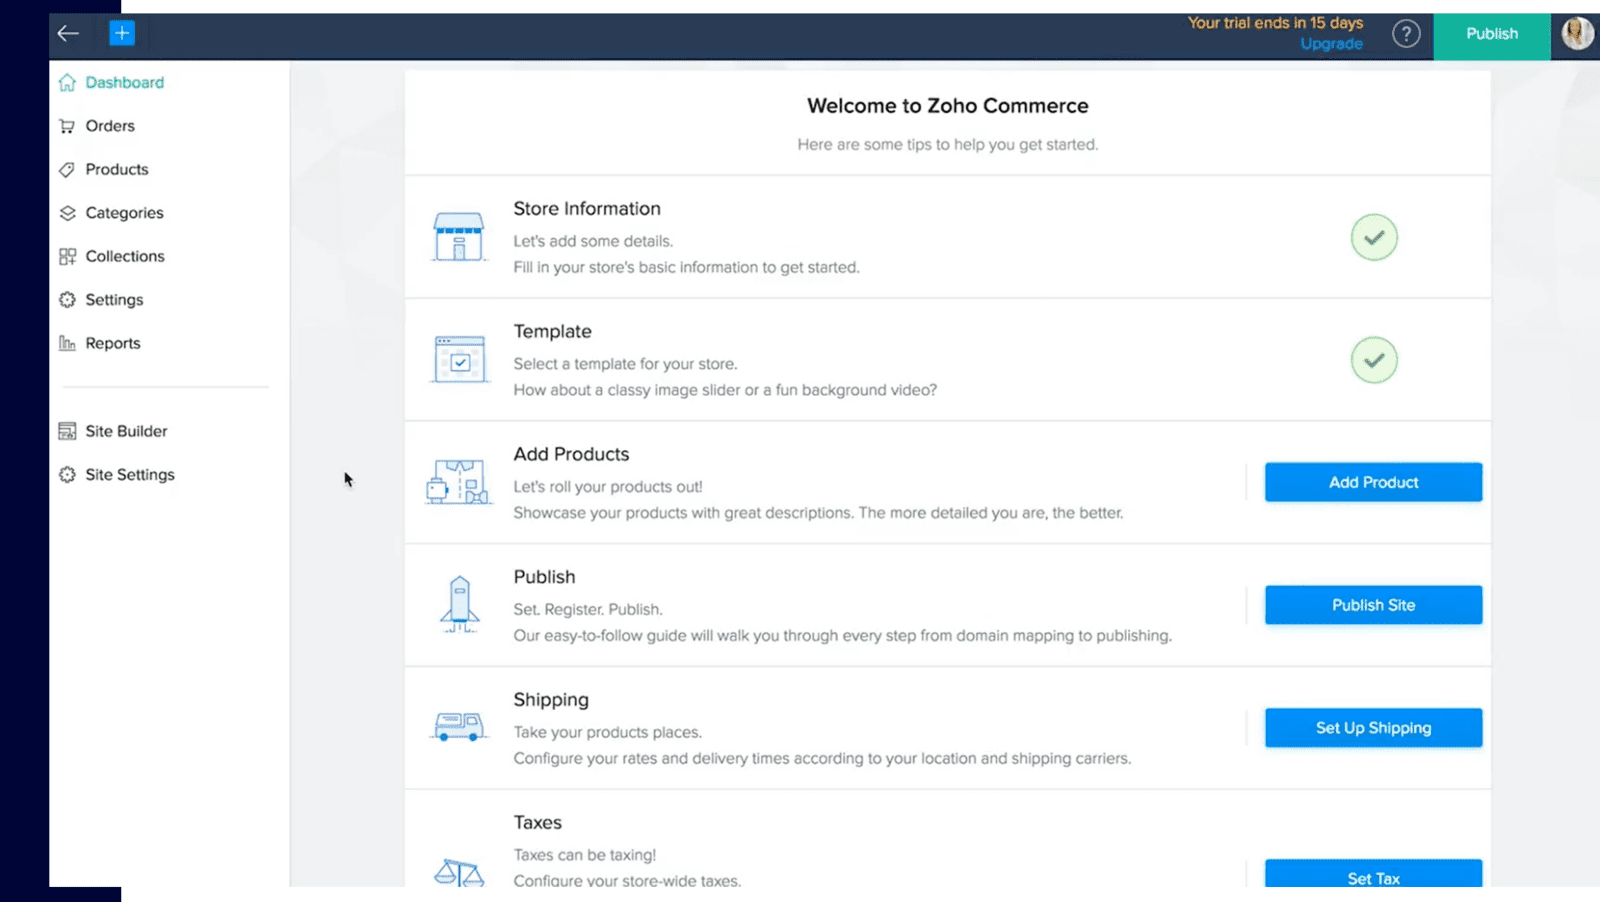 Screenshot of the steps to take in order to set up your ecommerce store in the Zoho Commerce